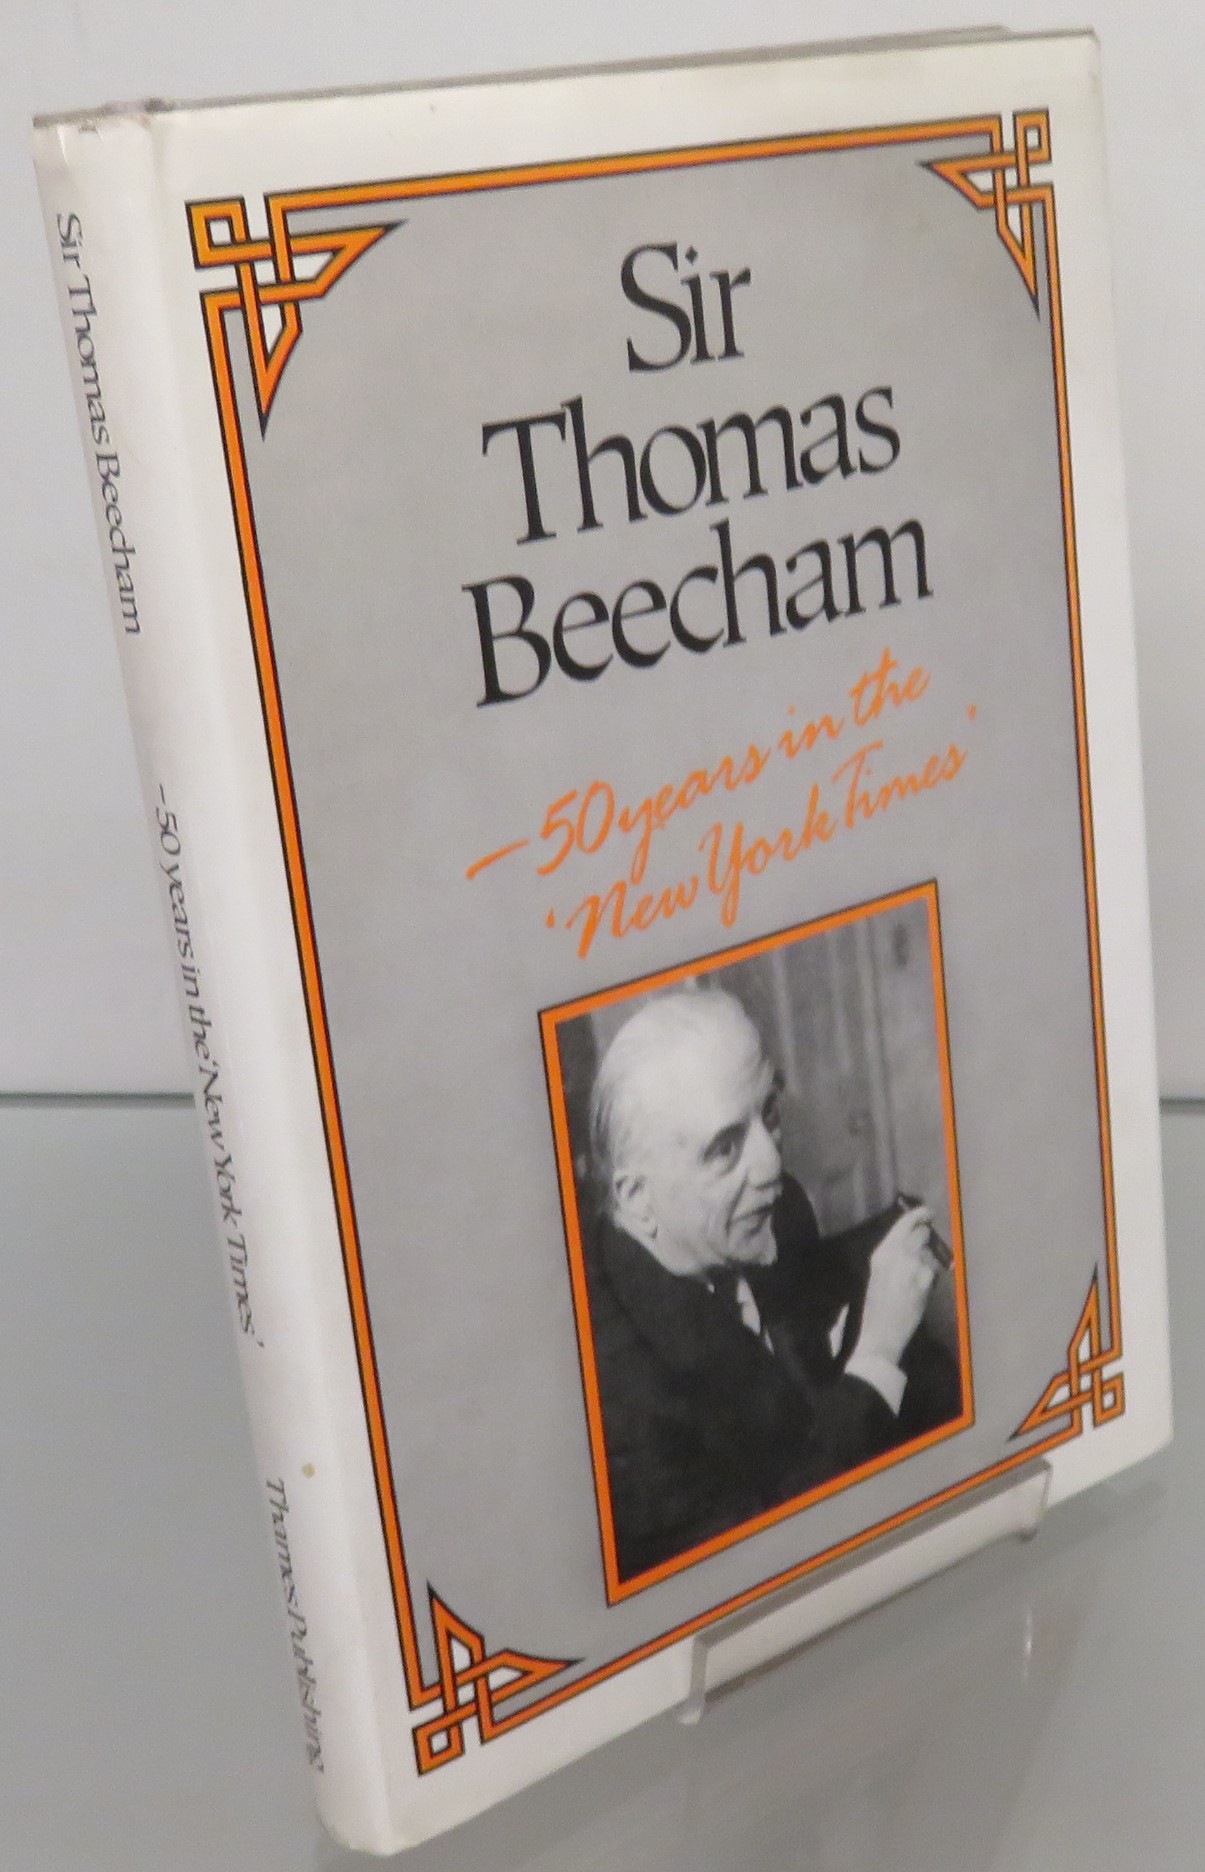 Sir Thomas Beecham: Fifty Years in the New York Times